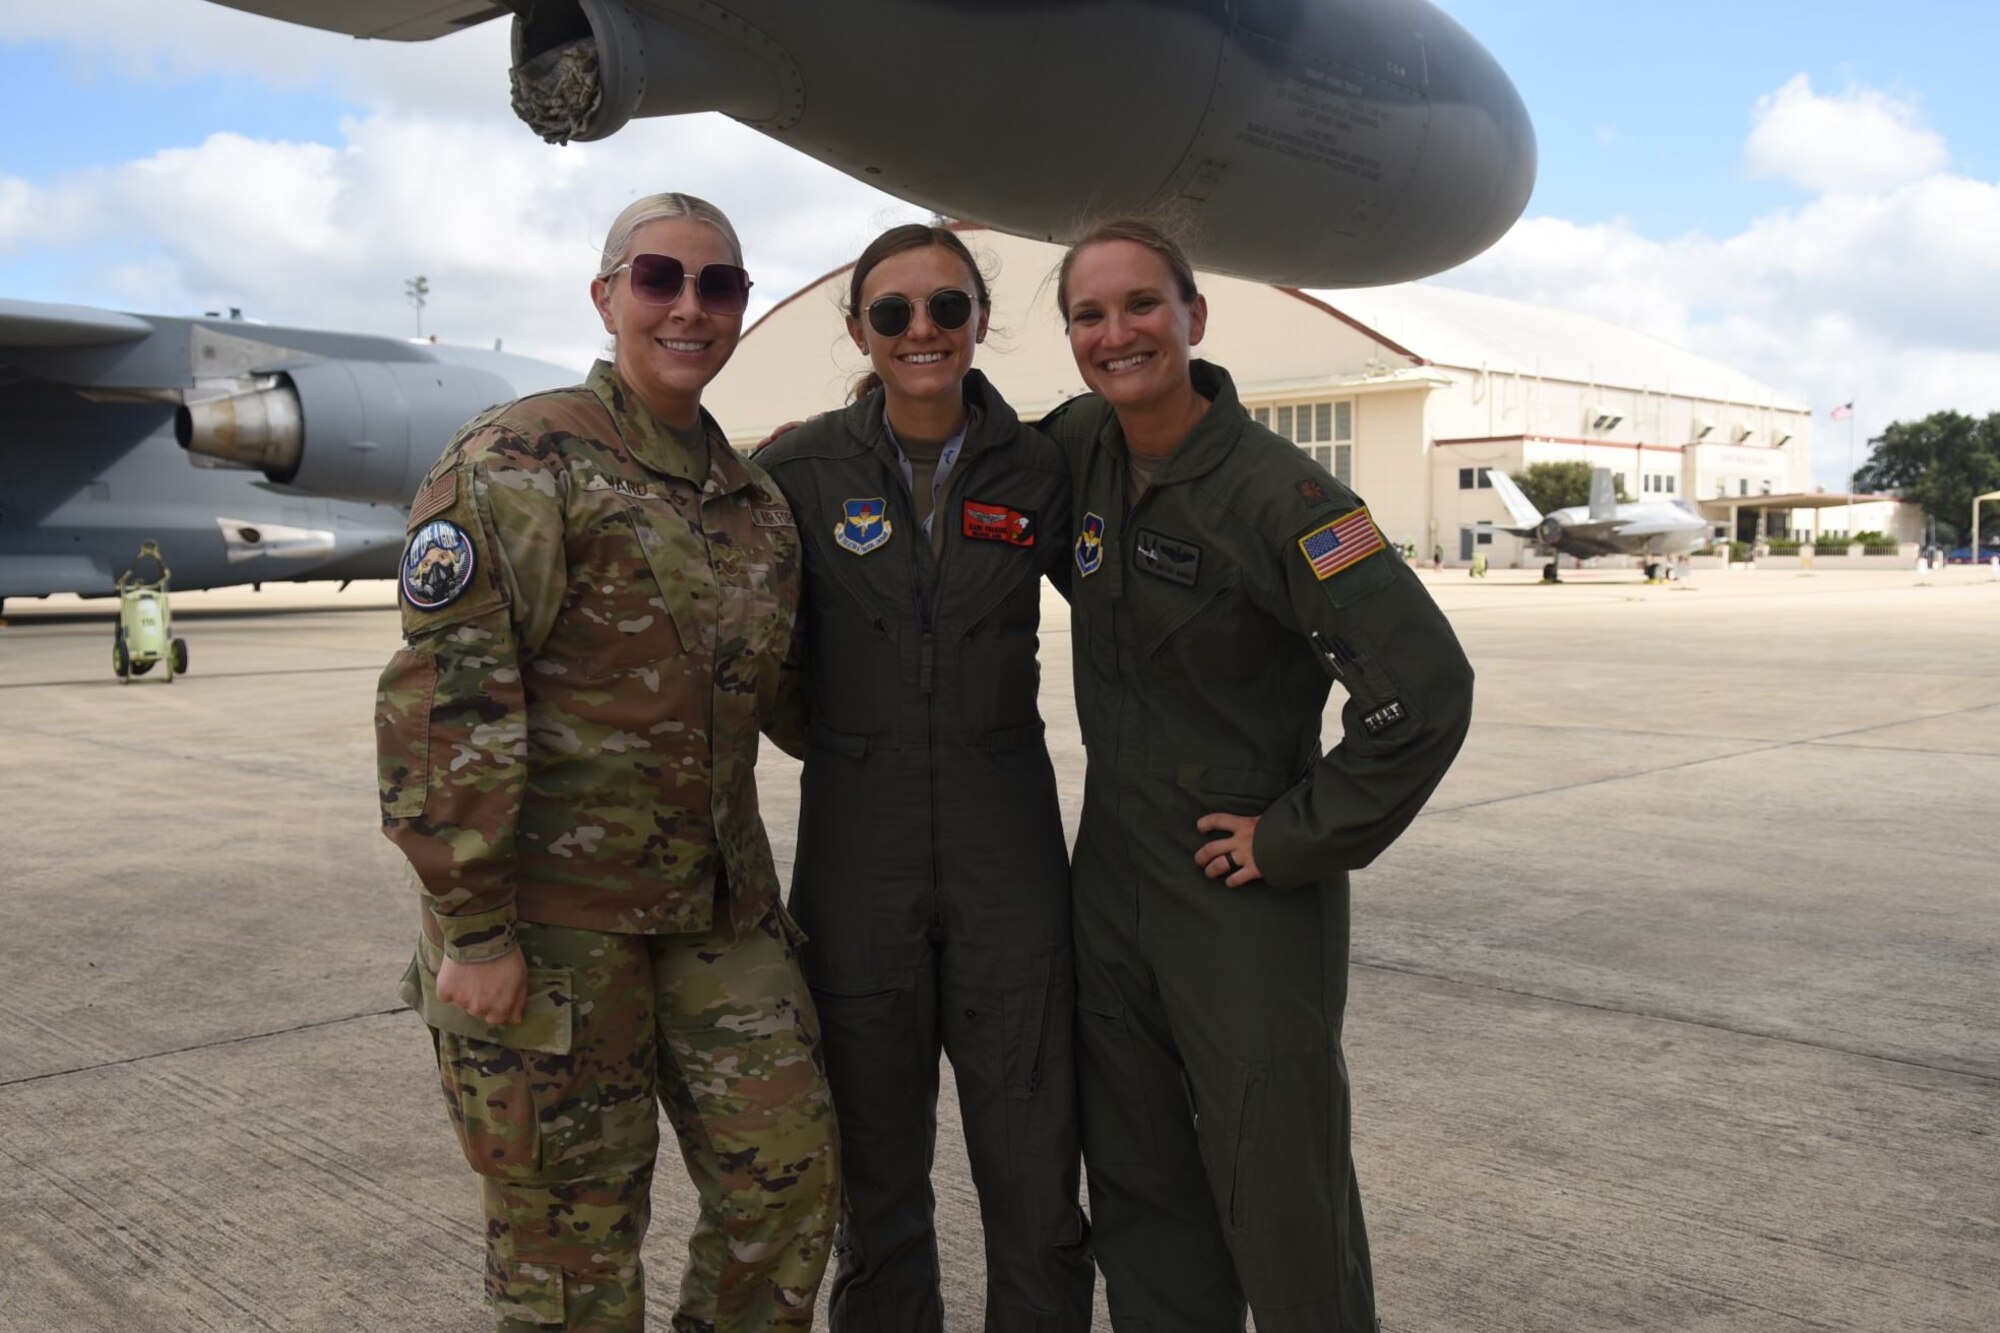 Two women in flight suits and another in OCPs pose under the wing of an aircraft.